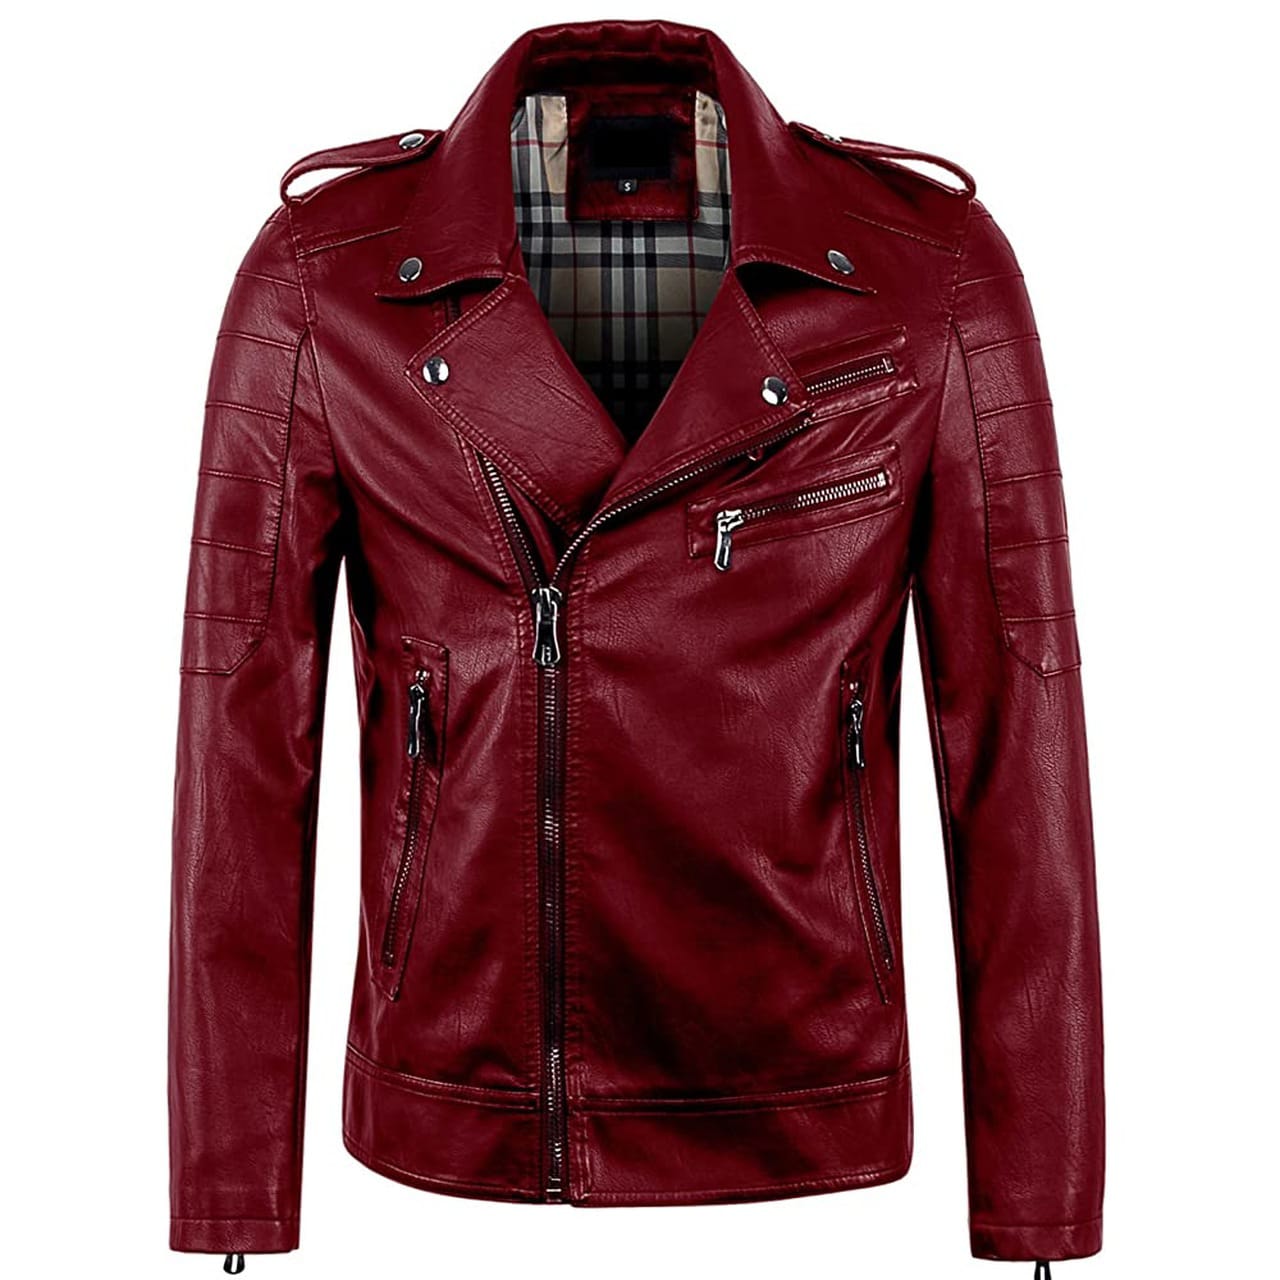 Light Weight Geniune Leather Jacket with Zip in Red Vintage Color for Men